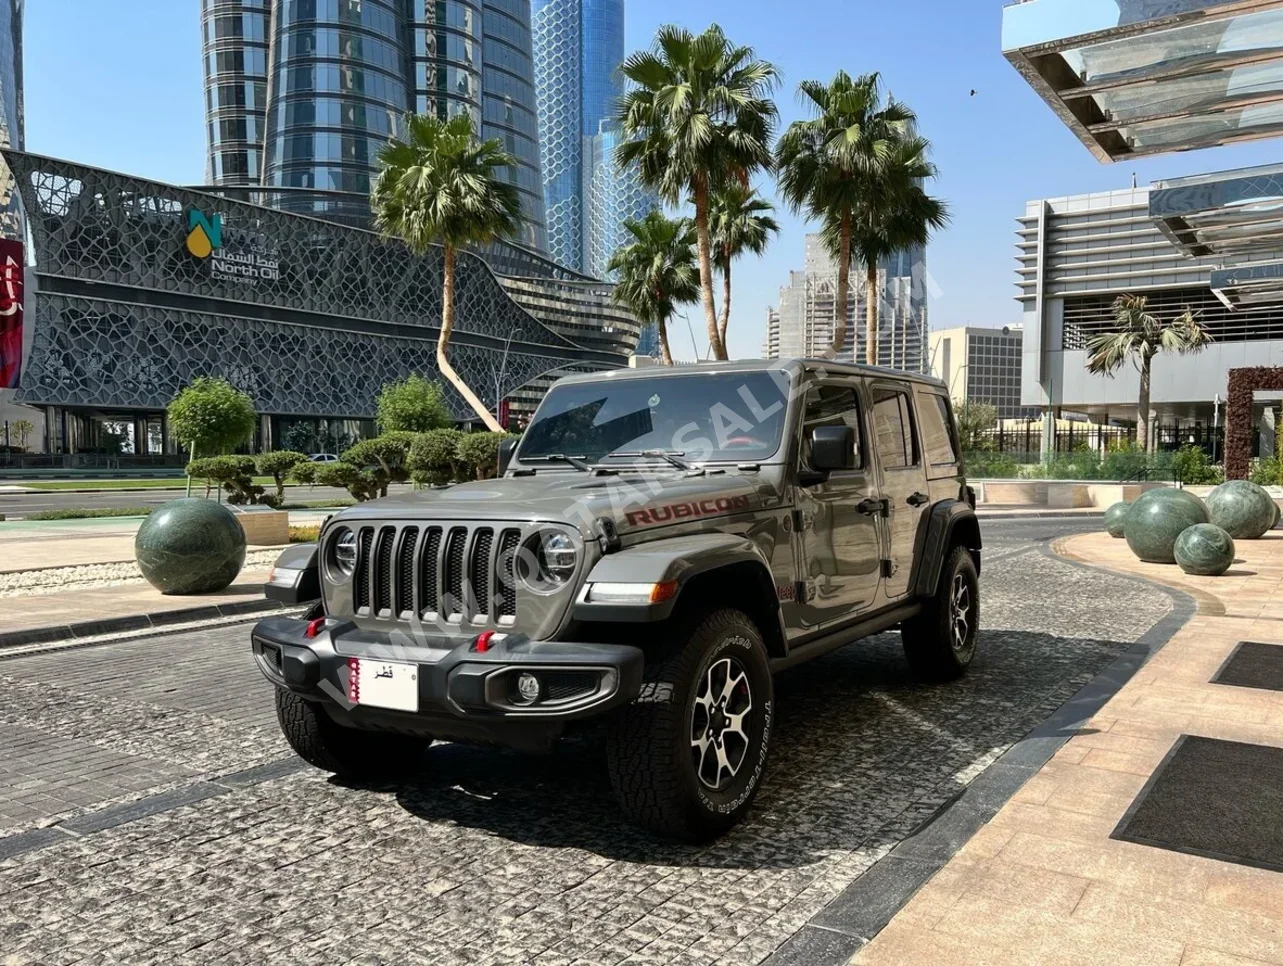 Jeep  Wrangler  Rubicon  2021  Automatic  24,000 Km  6 Cylinder  Four Wheel Drive (4WD)  SUV  Silver  With Warranty